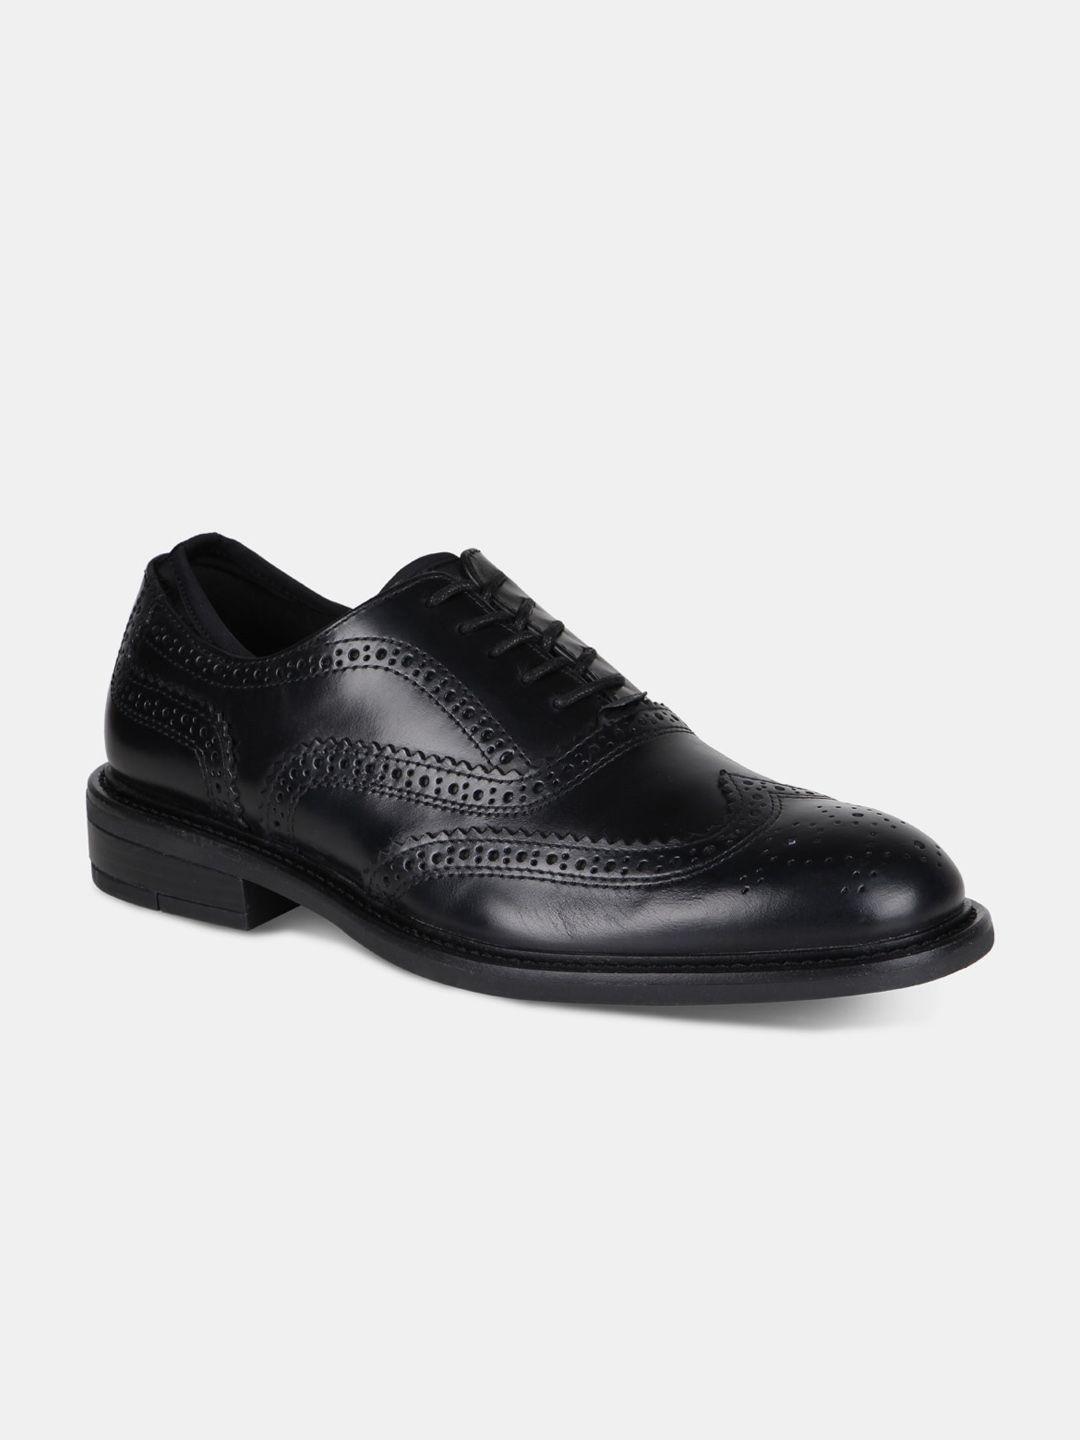 kenneth cole men black textured leather formal brogues